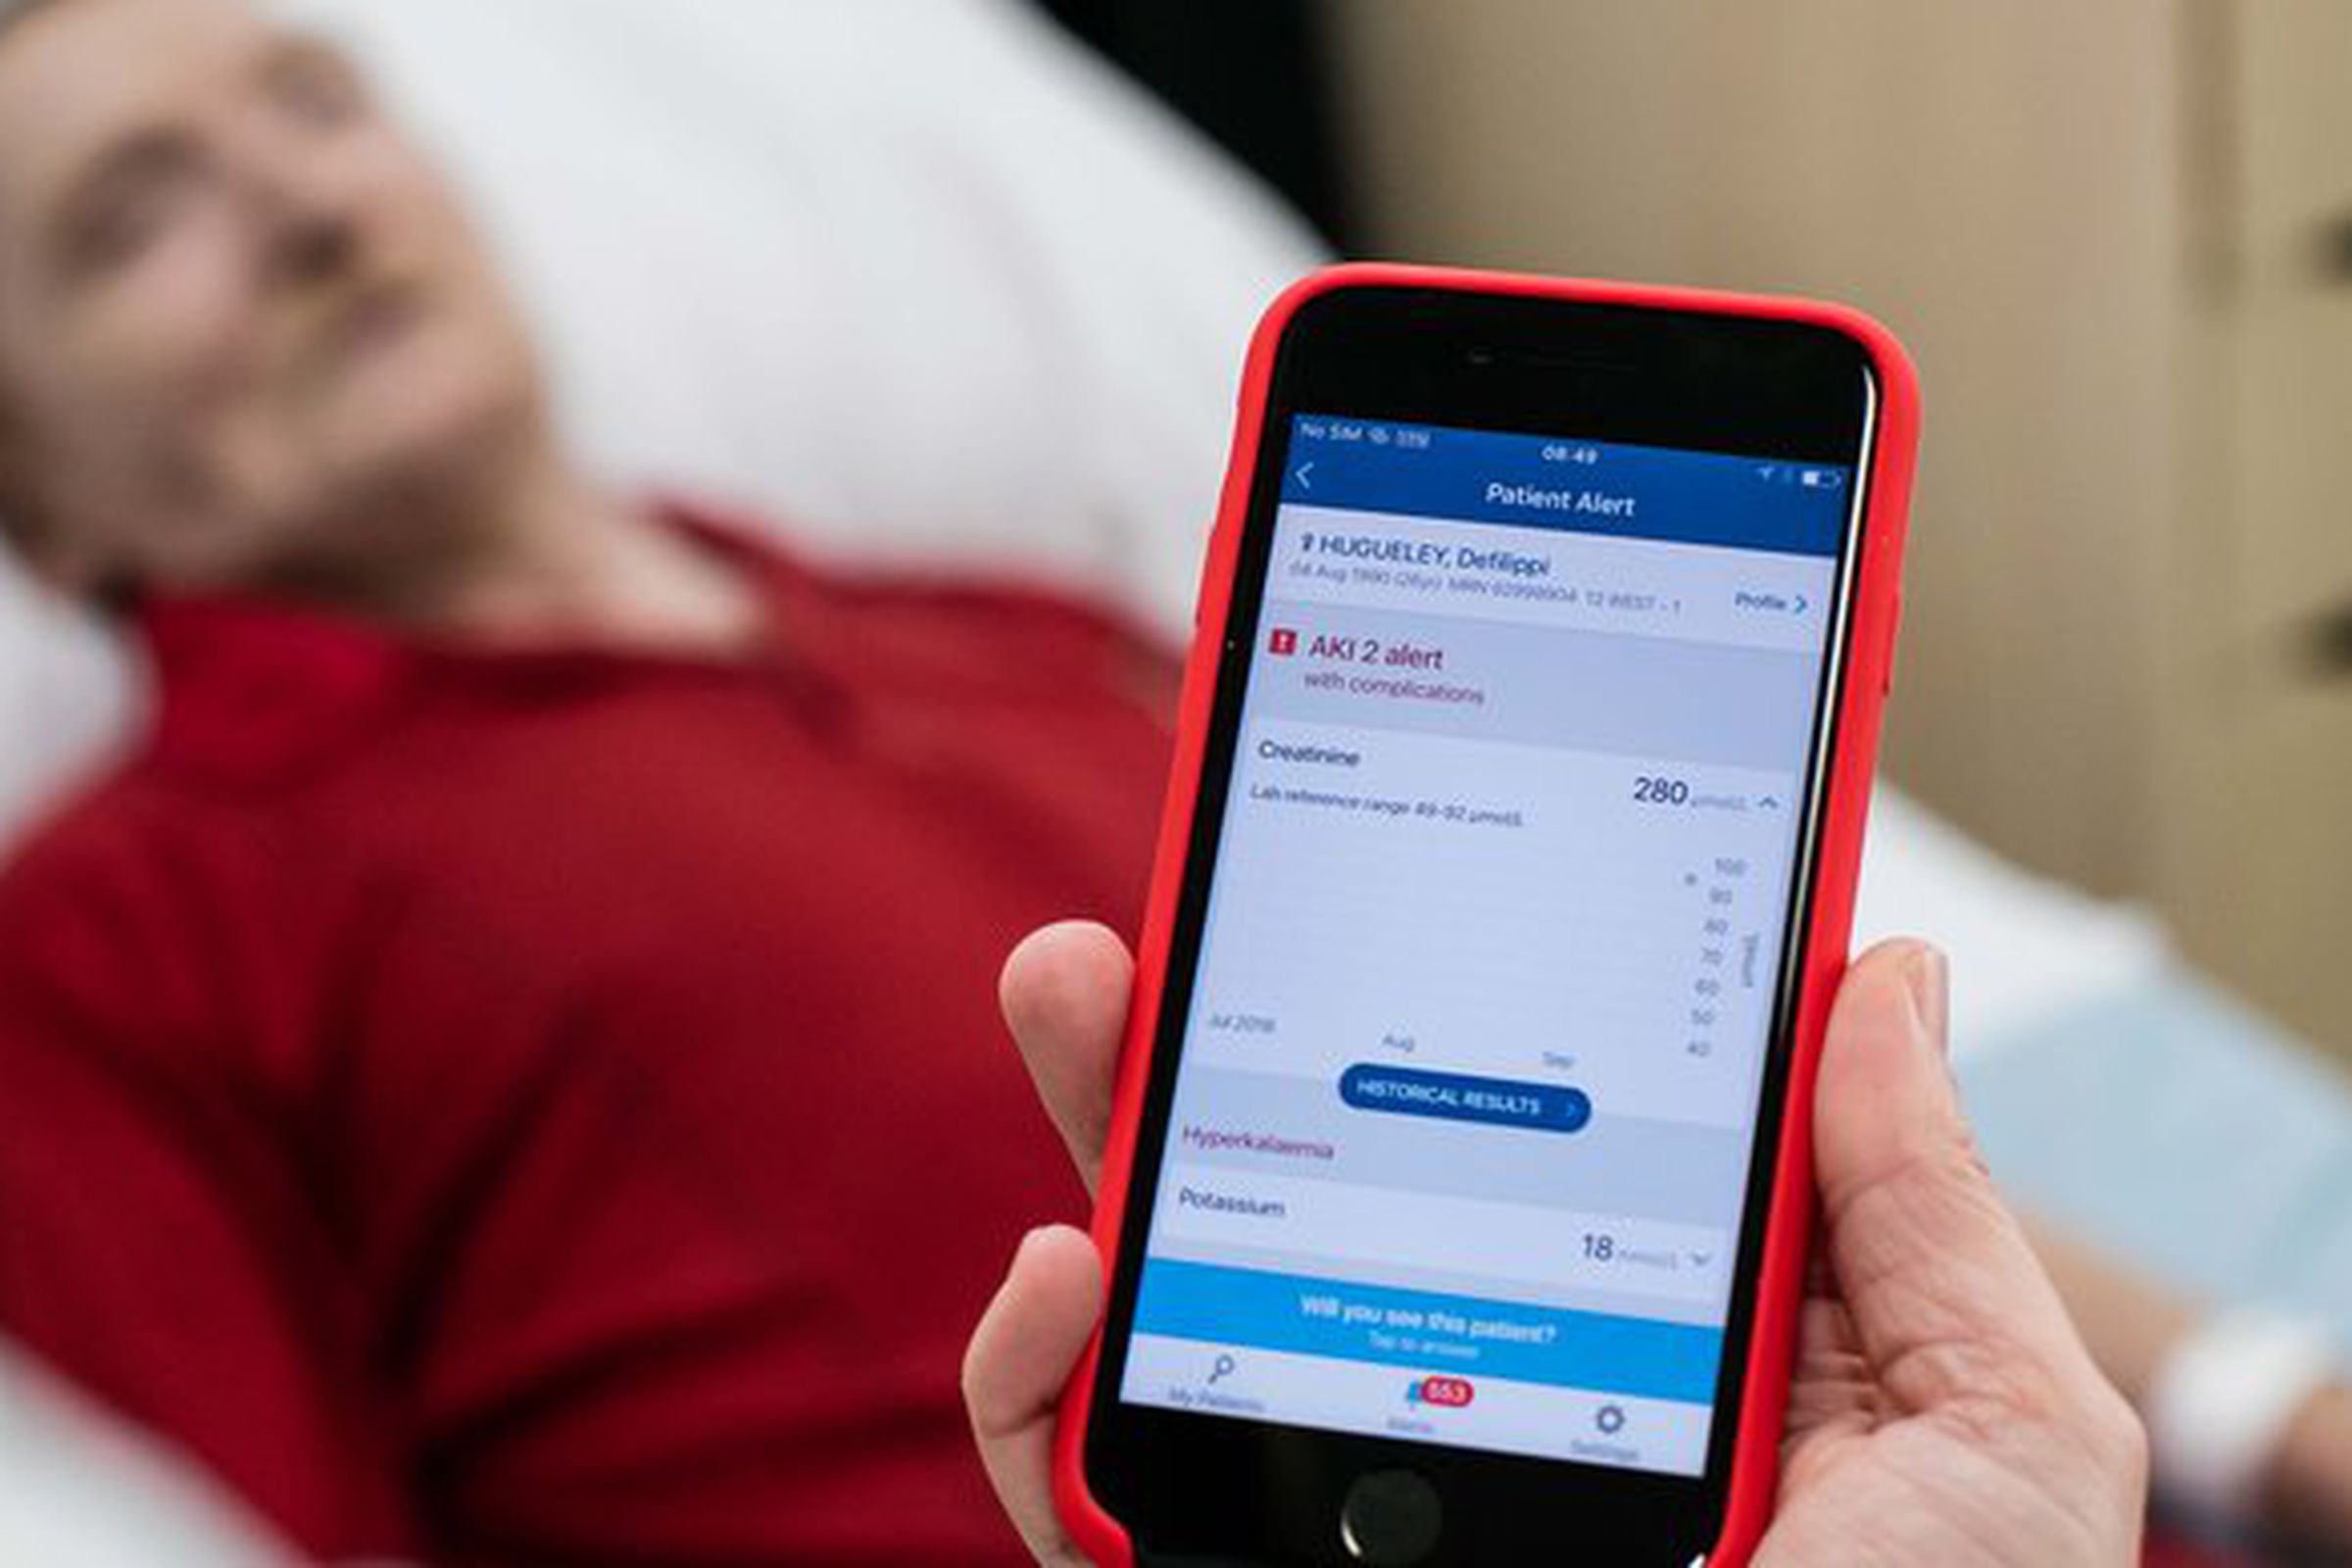 DeepMind’s Streams app is used to filter patient’s medical data. 